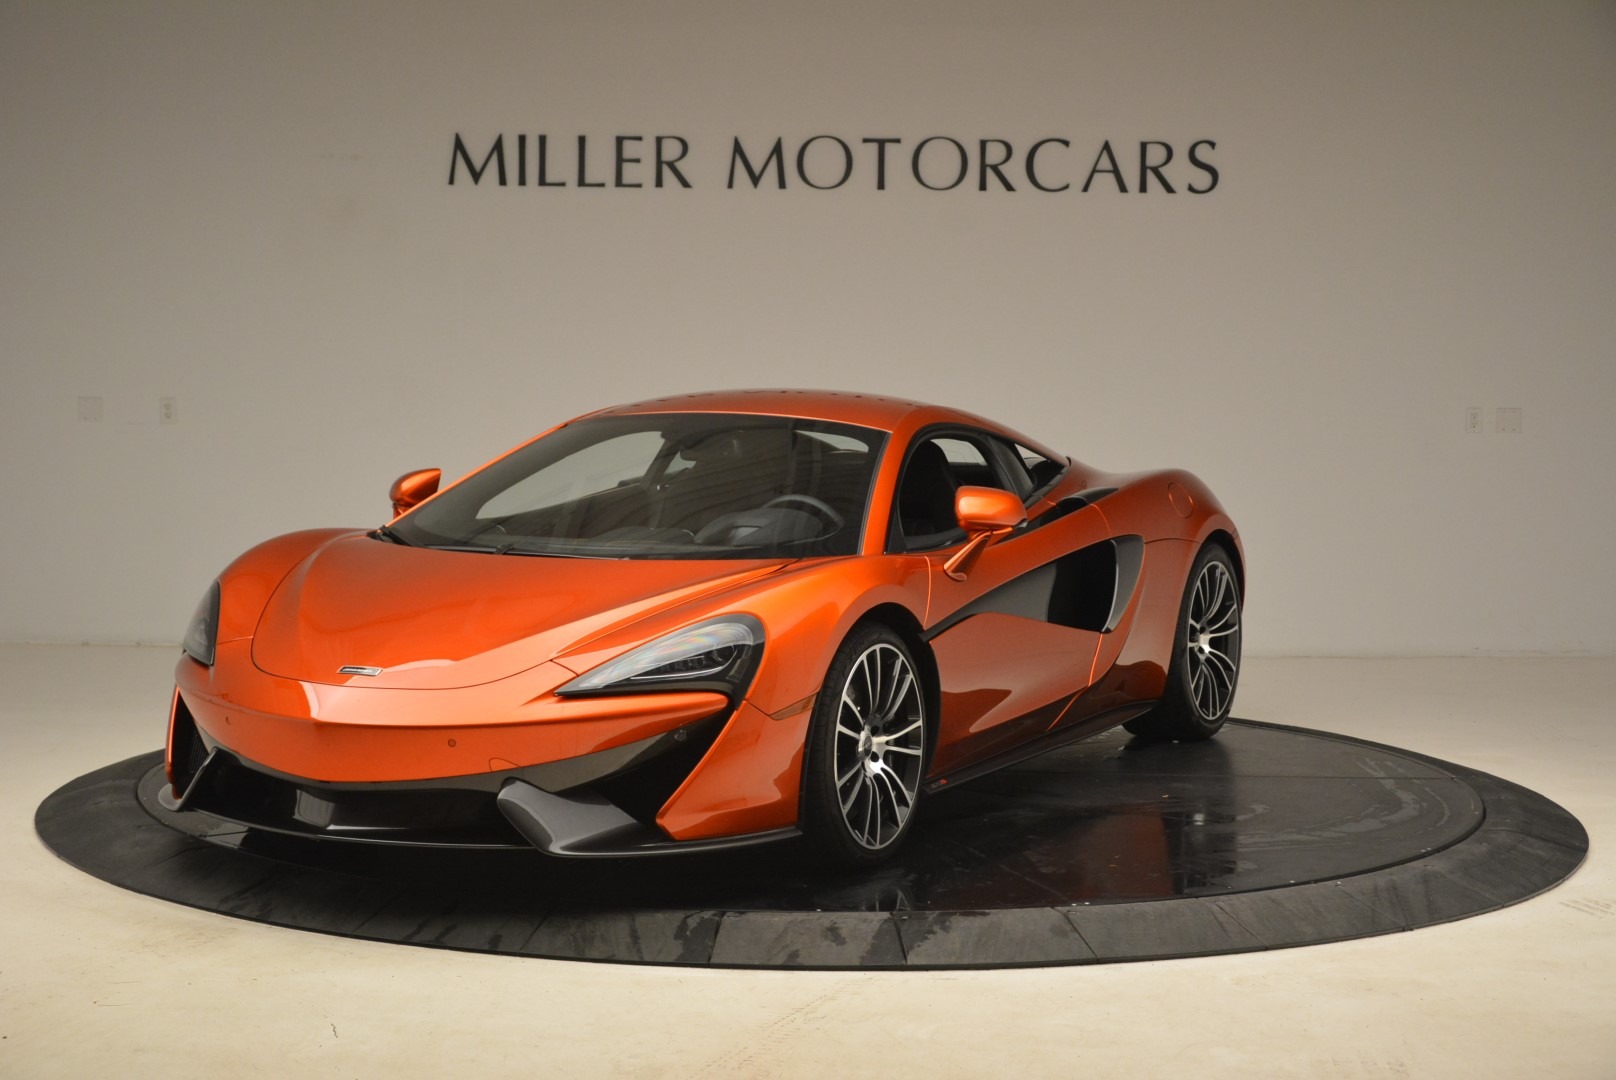 Used 2016 McLaren 570S for sale Sold at McLaren Greenwich in Greenwich CT 06830 1